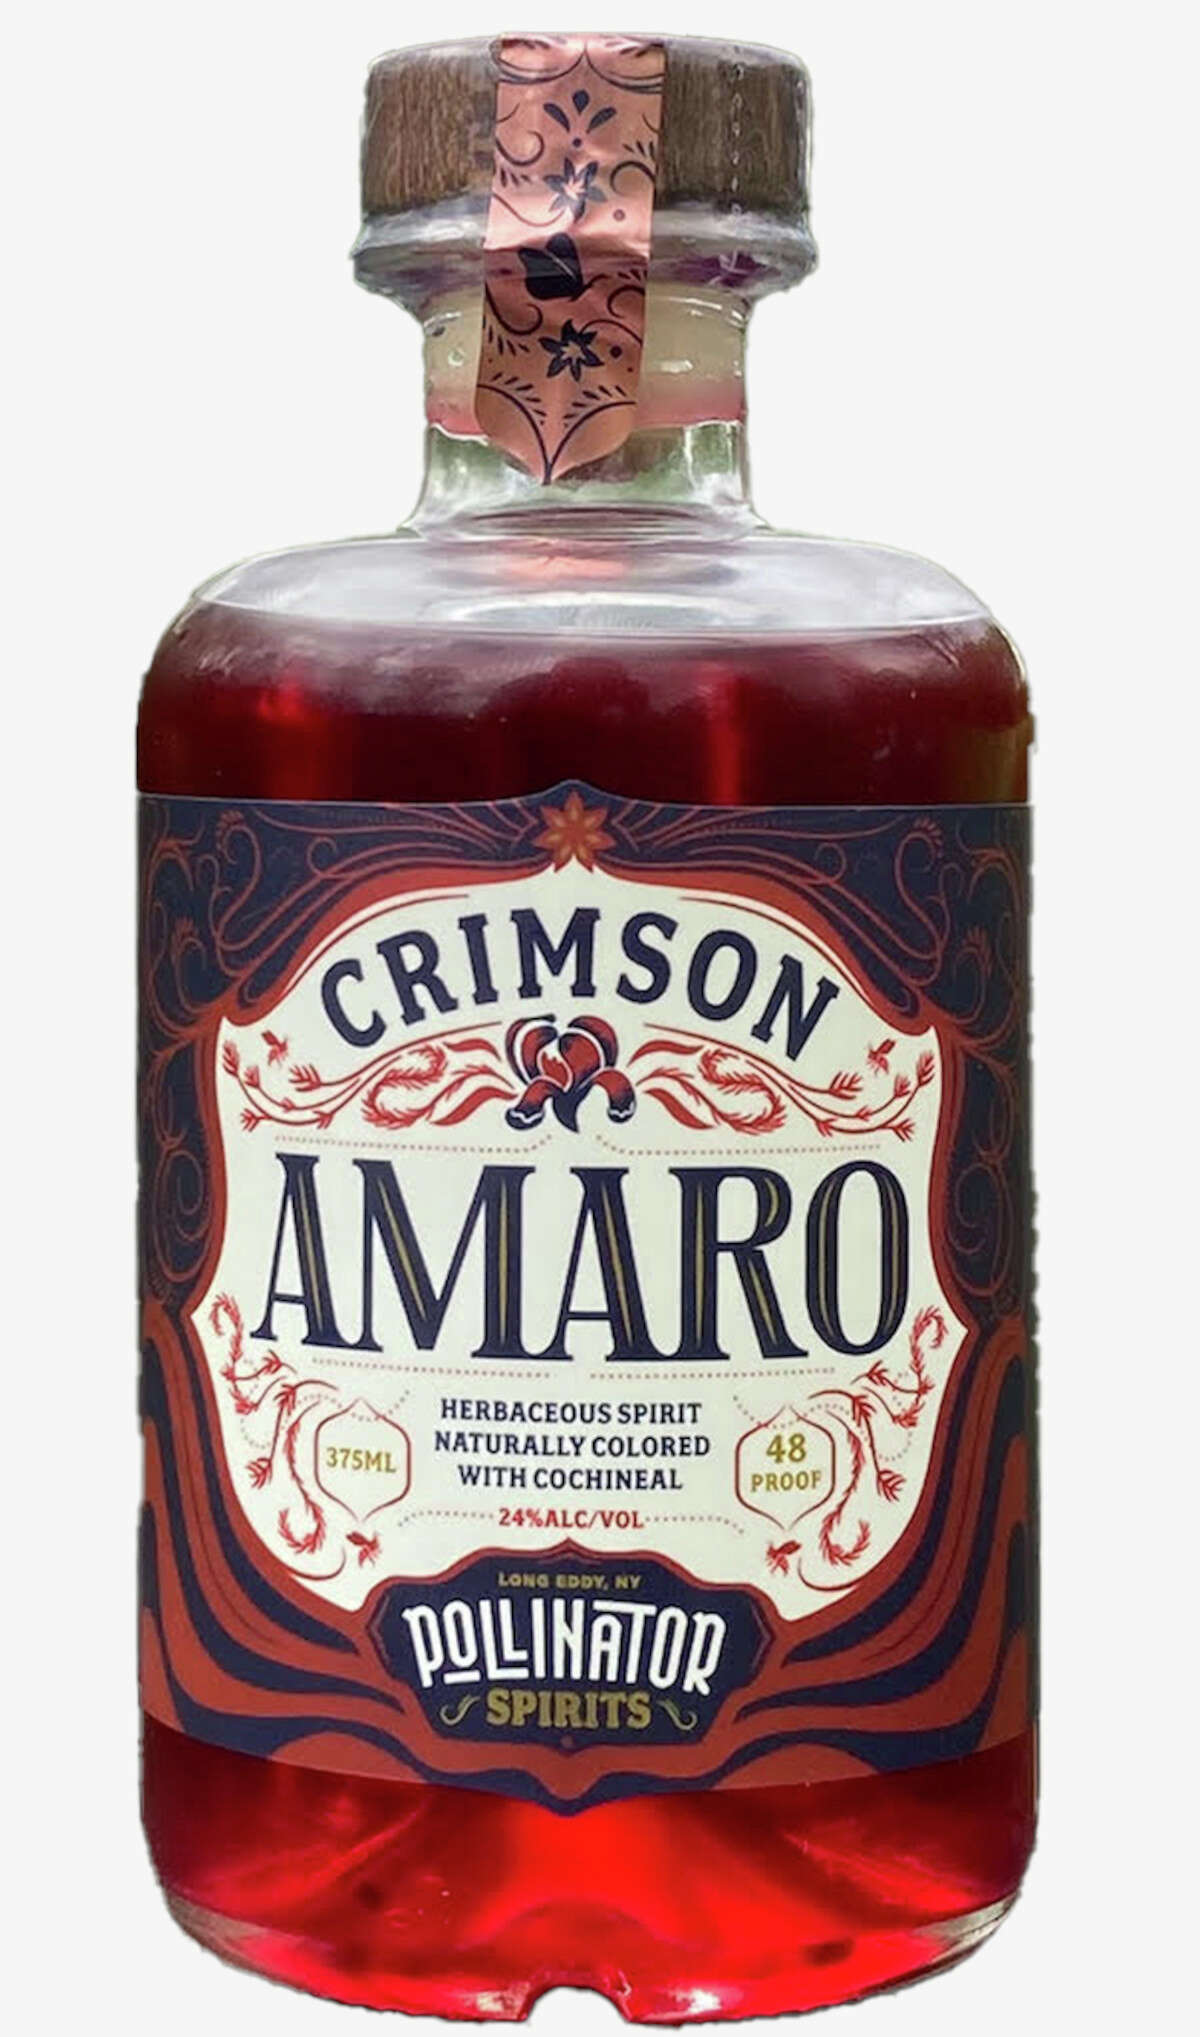 New to the Pollinator brand from Catskill Provisions Distillery is Crimson Amaro, made with the company's vodka and 15 botanicals. It gets its color from cochineal, along used as a food dye and made from insects. 